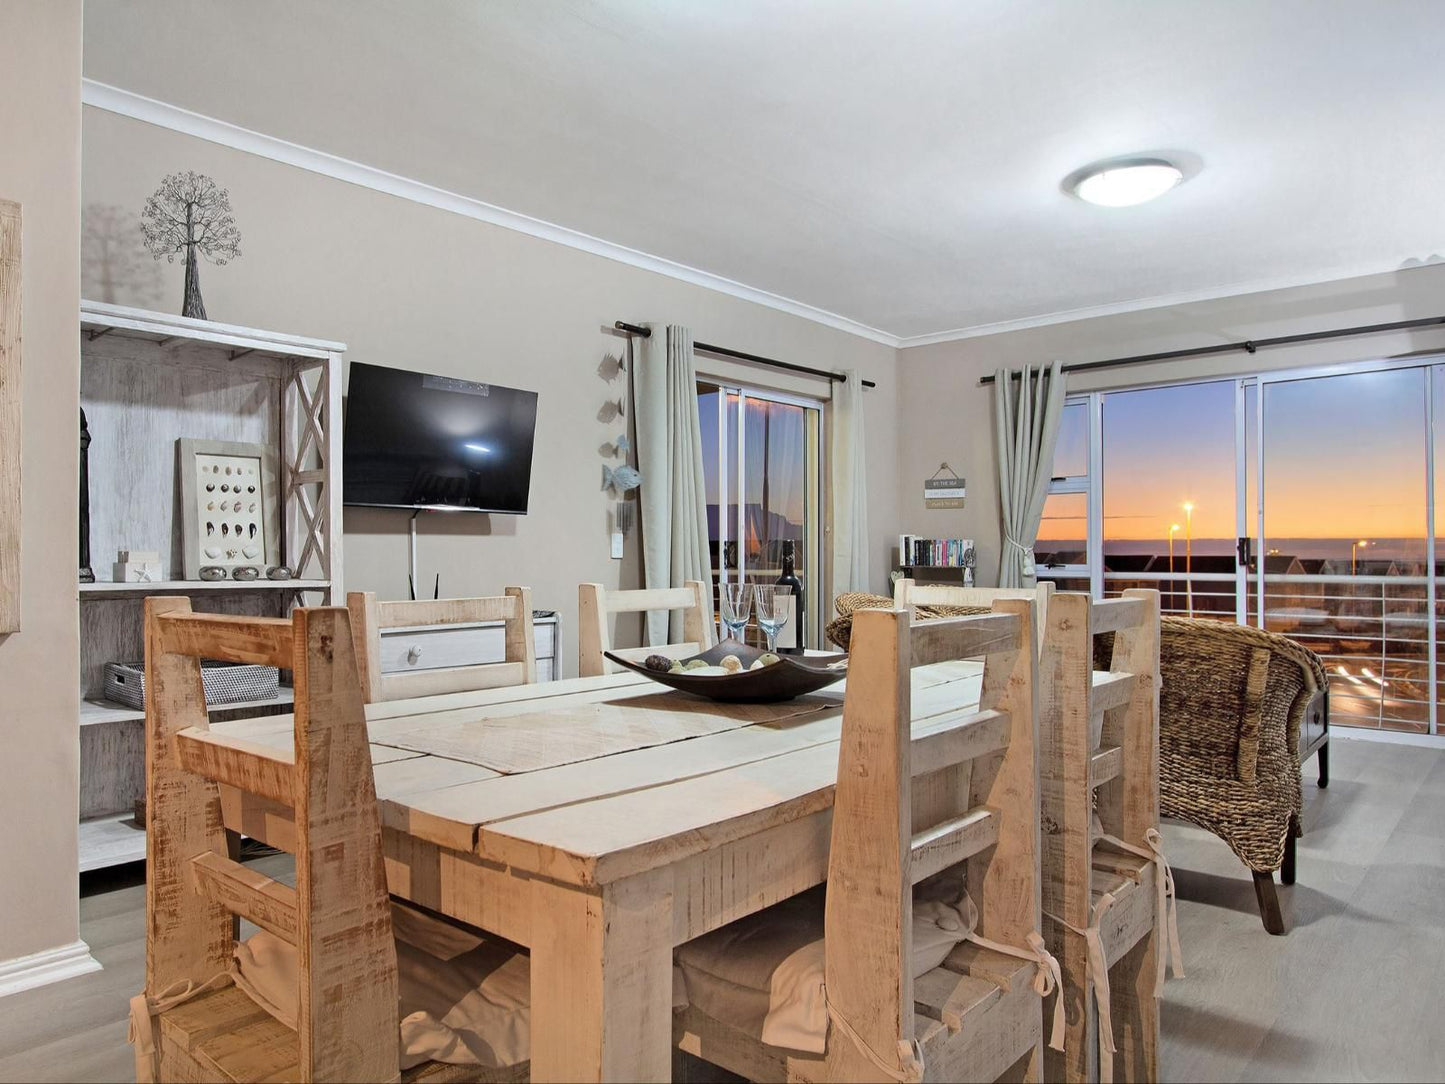 Dolphin Ridge 108 By Hostagents Bloubergstrand Blouberg Western Cape South Africa 